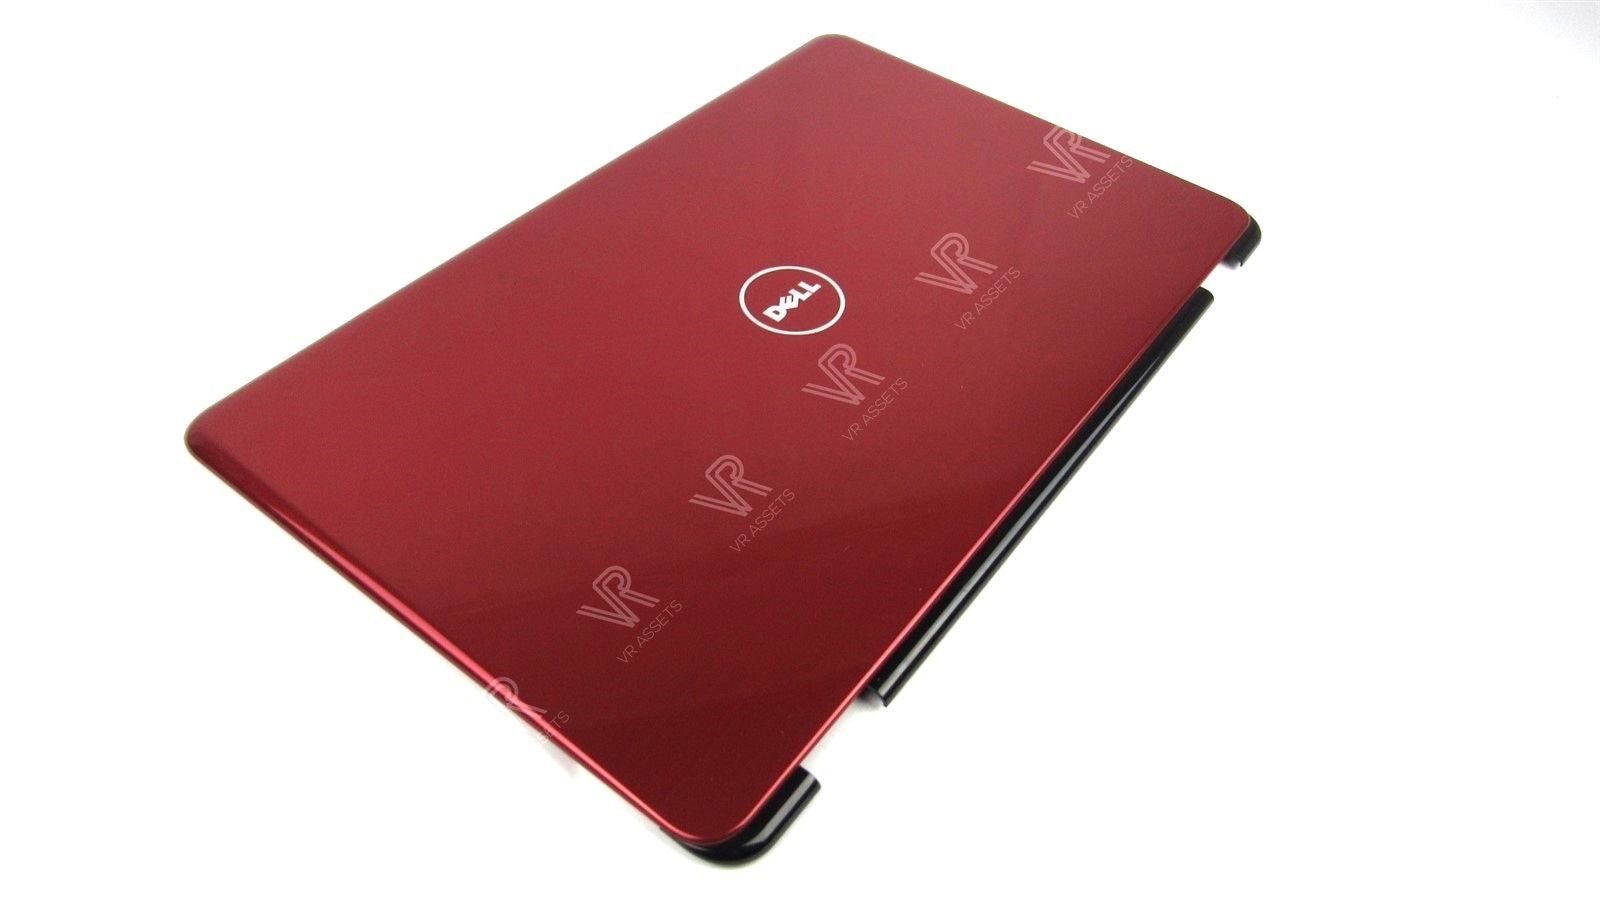 dell inspiron n7010 specifications